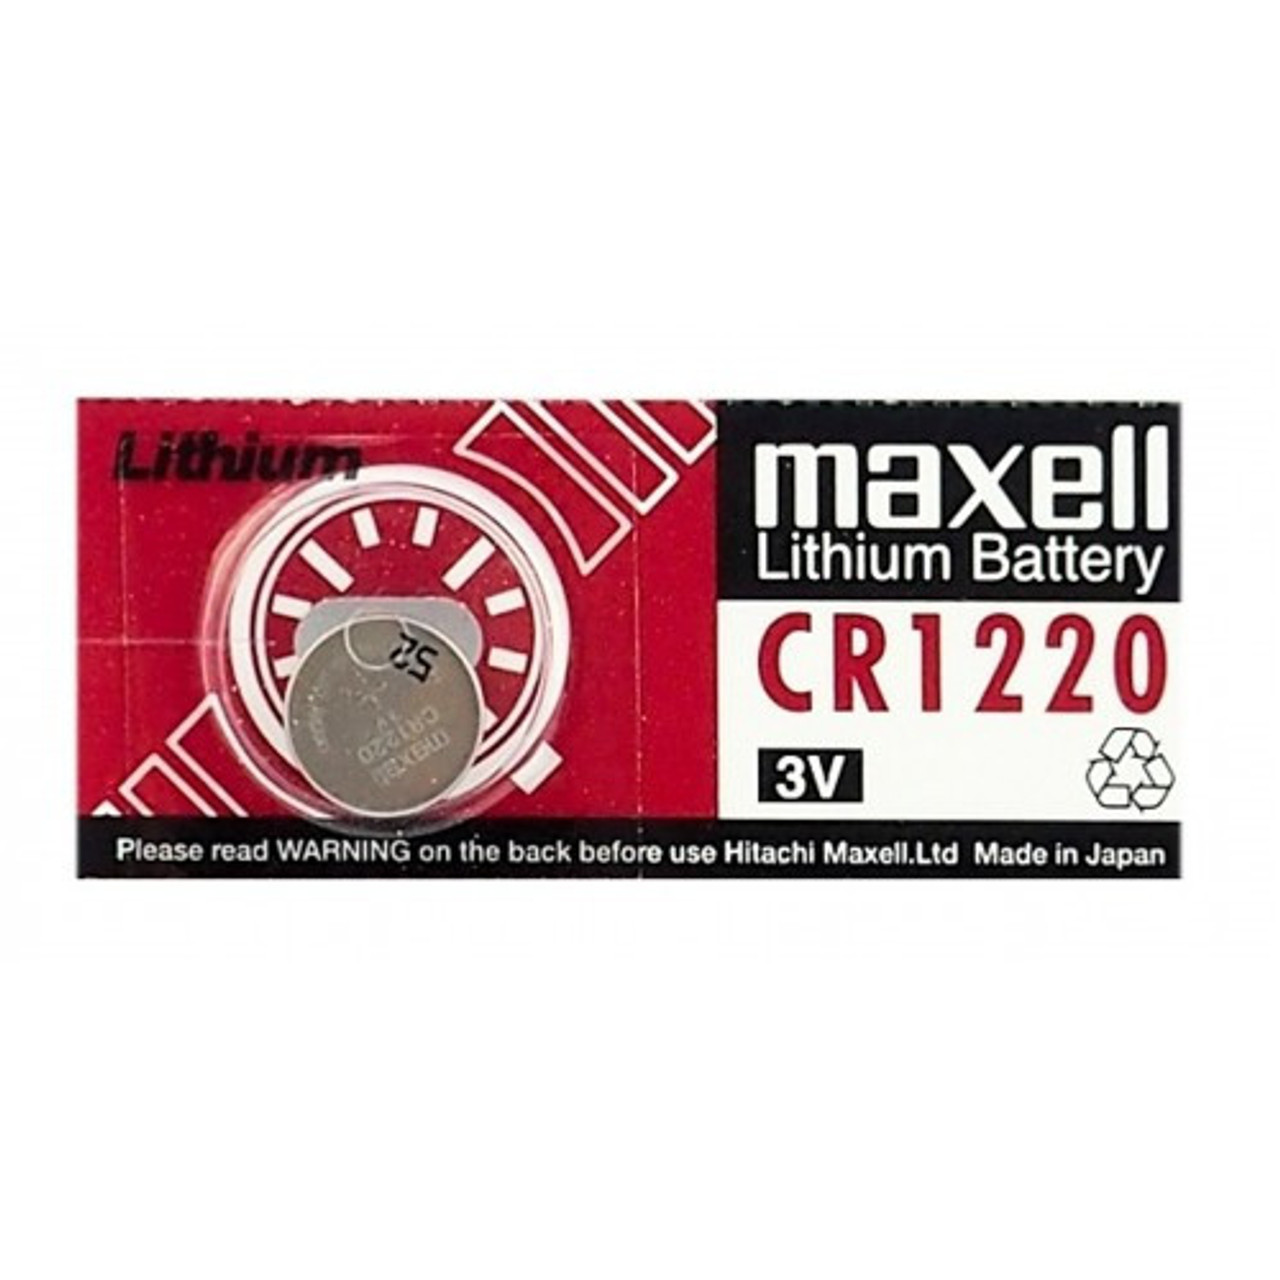 Maxell CR1220 3V Lithium Coin Battery 50 Pack FREE SHIPPING